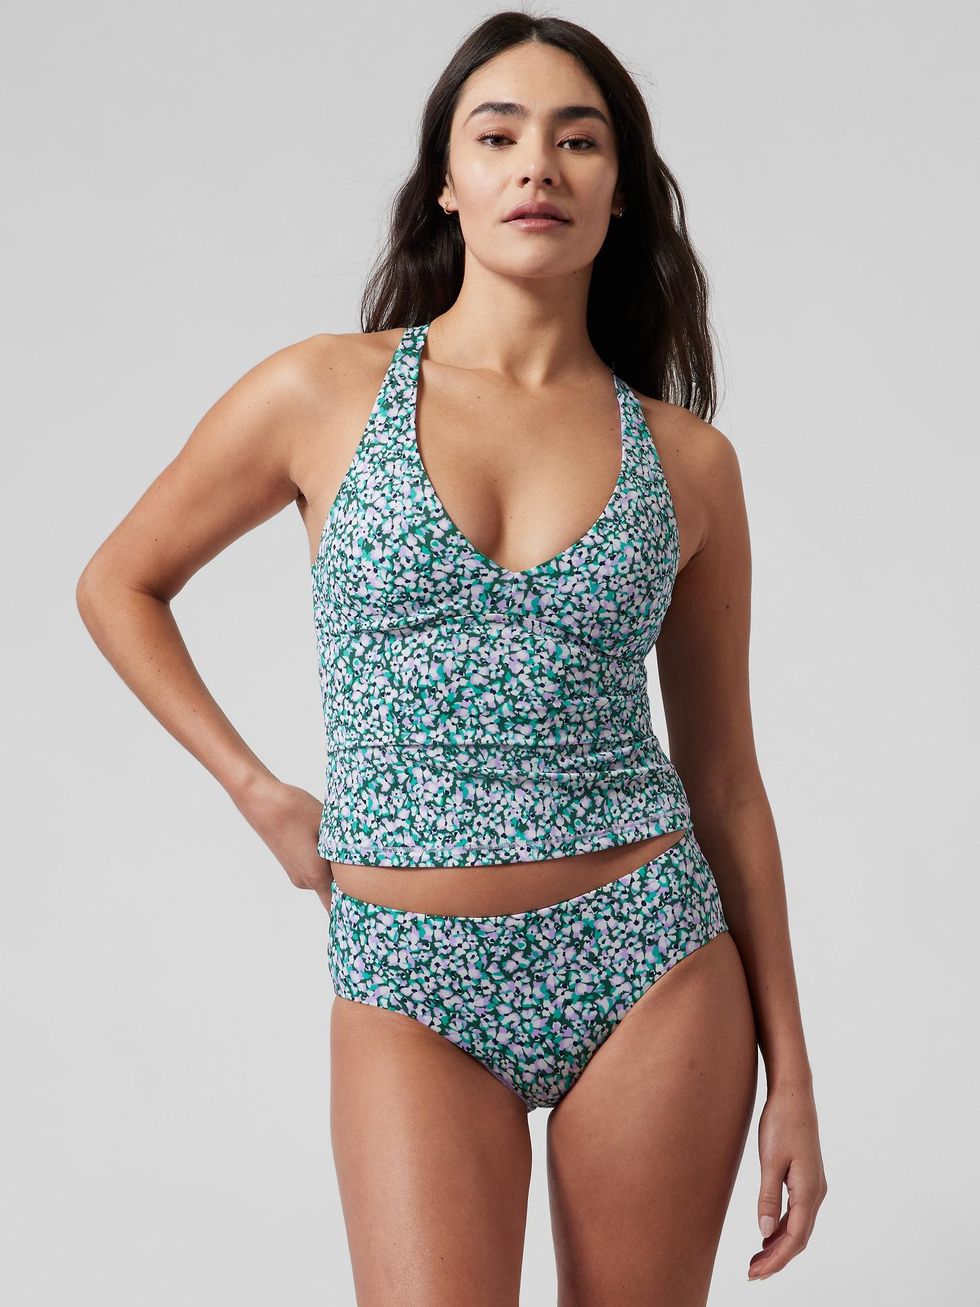 Plunge Tankini A-C full coverage swimsuits